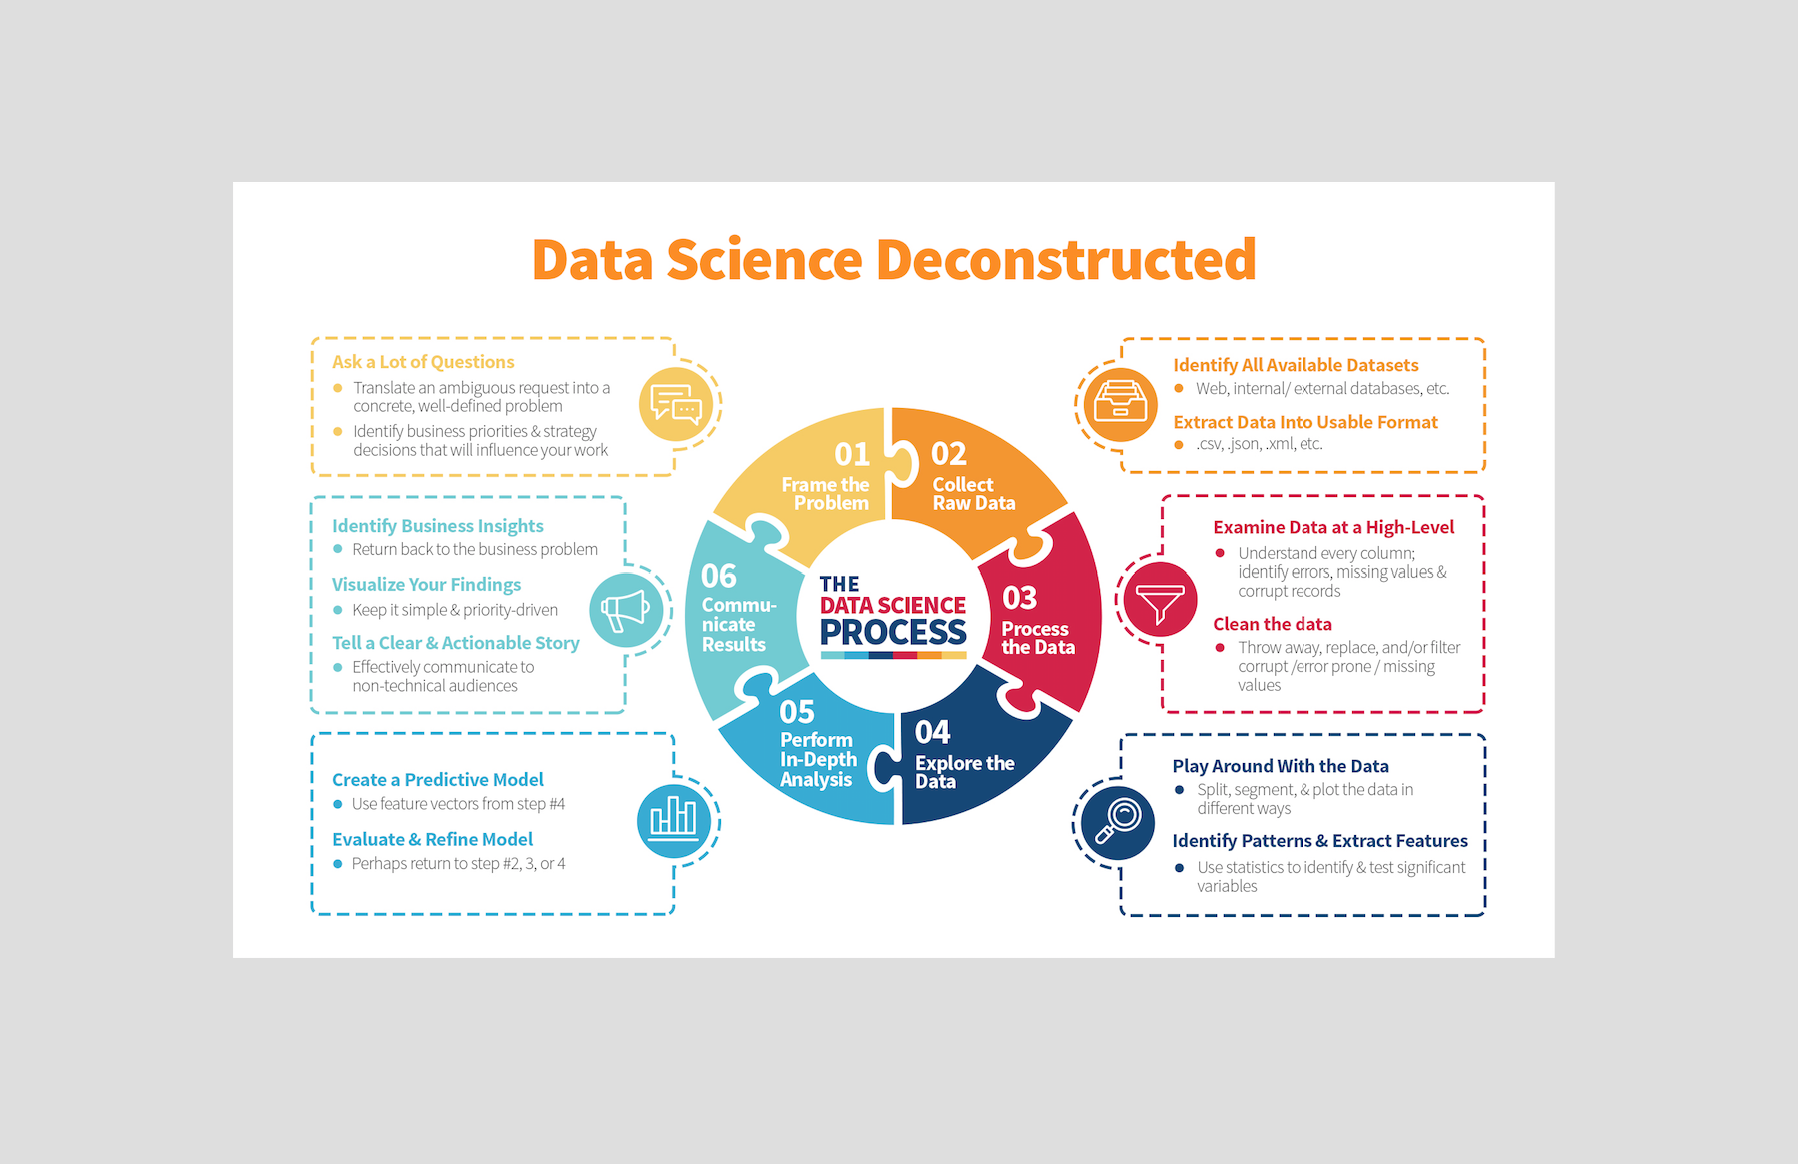 Deconstructing Data Science: Breaking The Complex Craft Into Its Simplest Parts